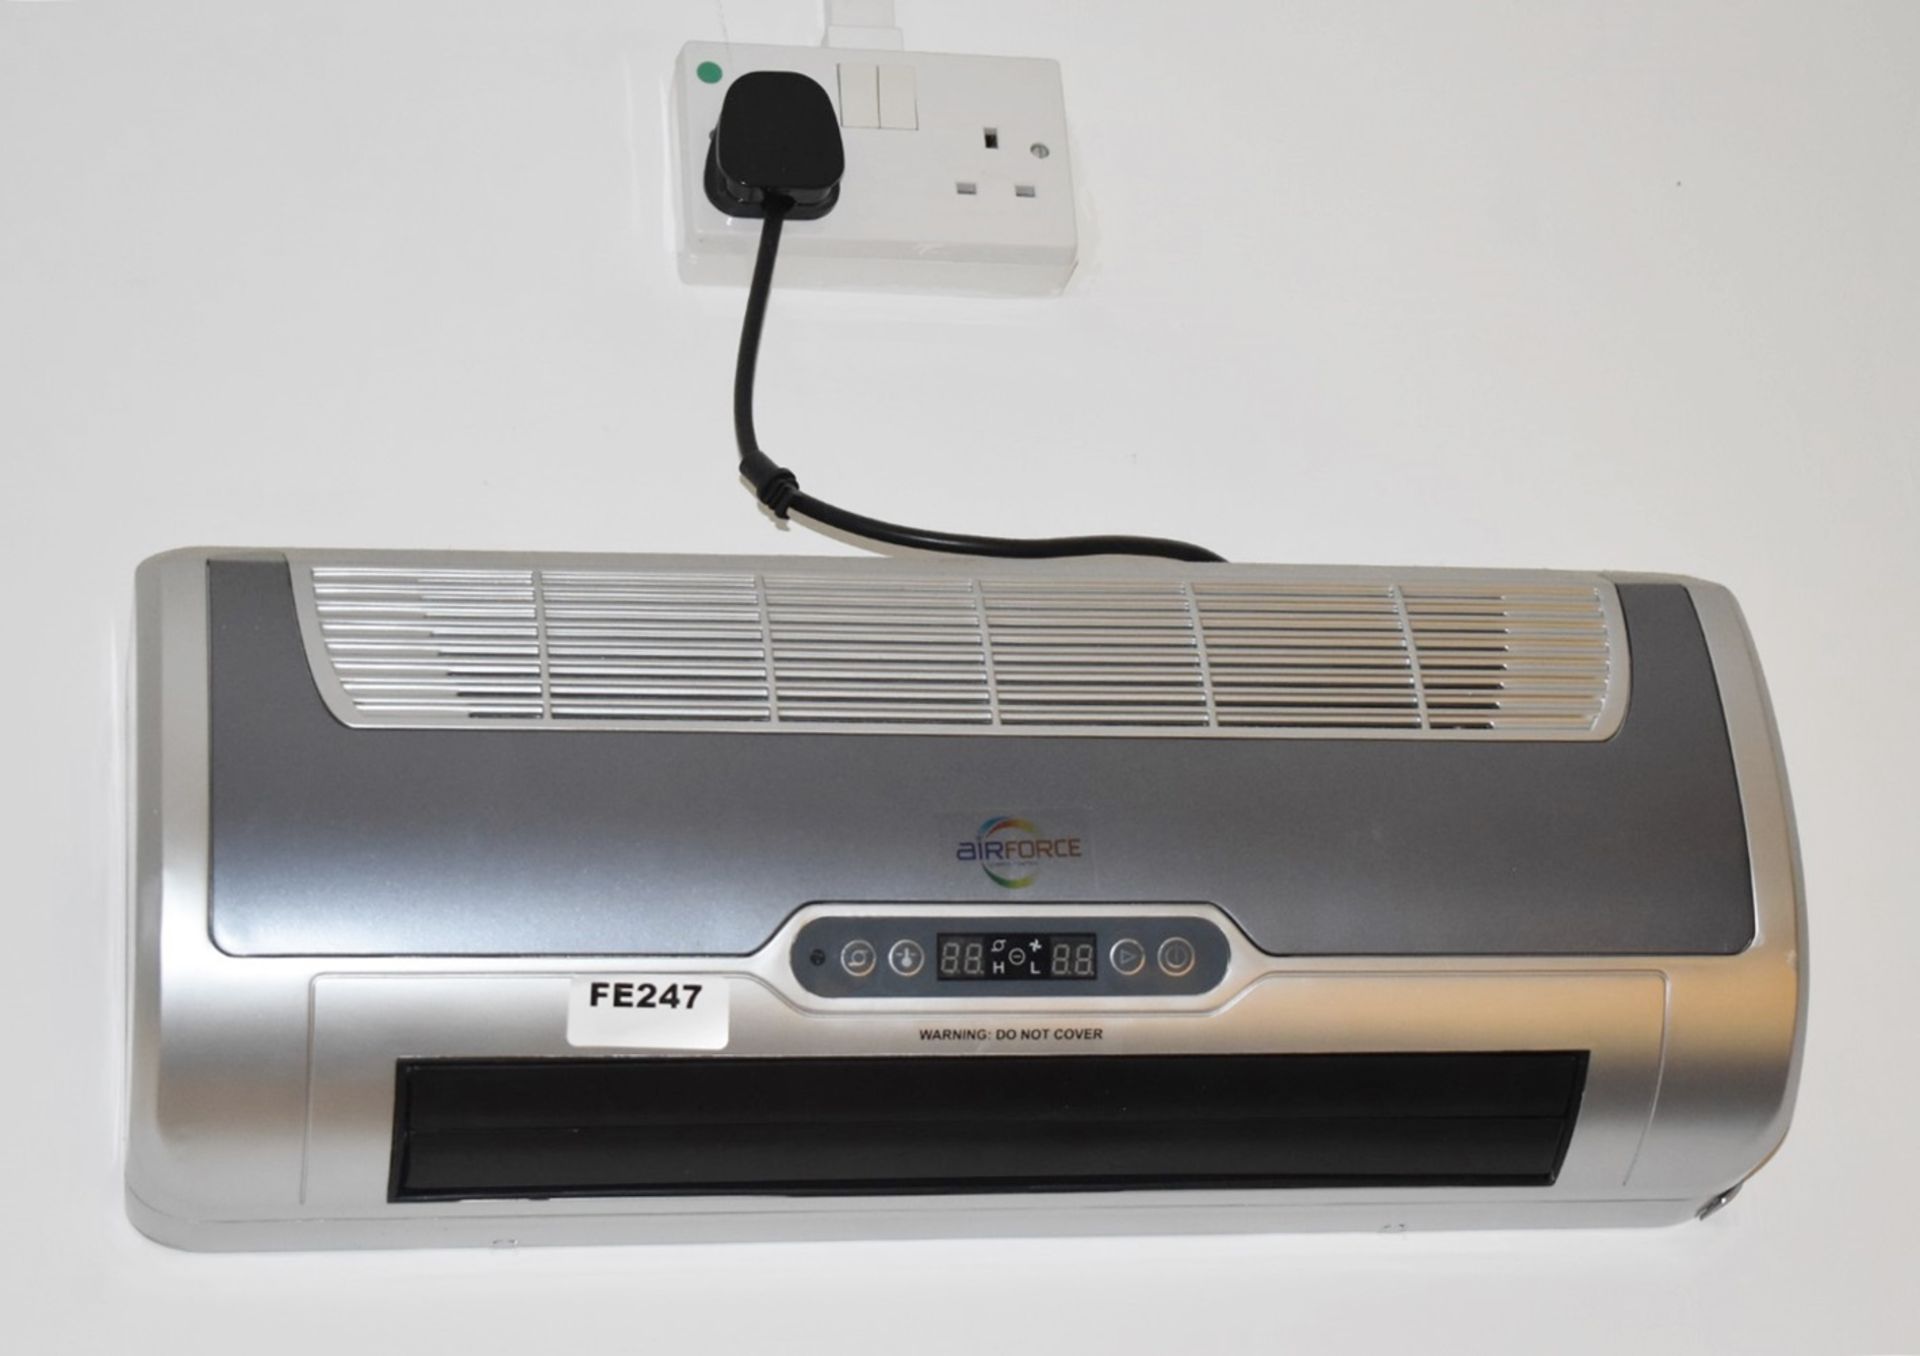 1 x Airforce Wall Mounted 240v Heater - Ref FE247 OUS - CL480 - Location: Nottingham NG15